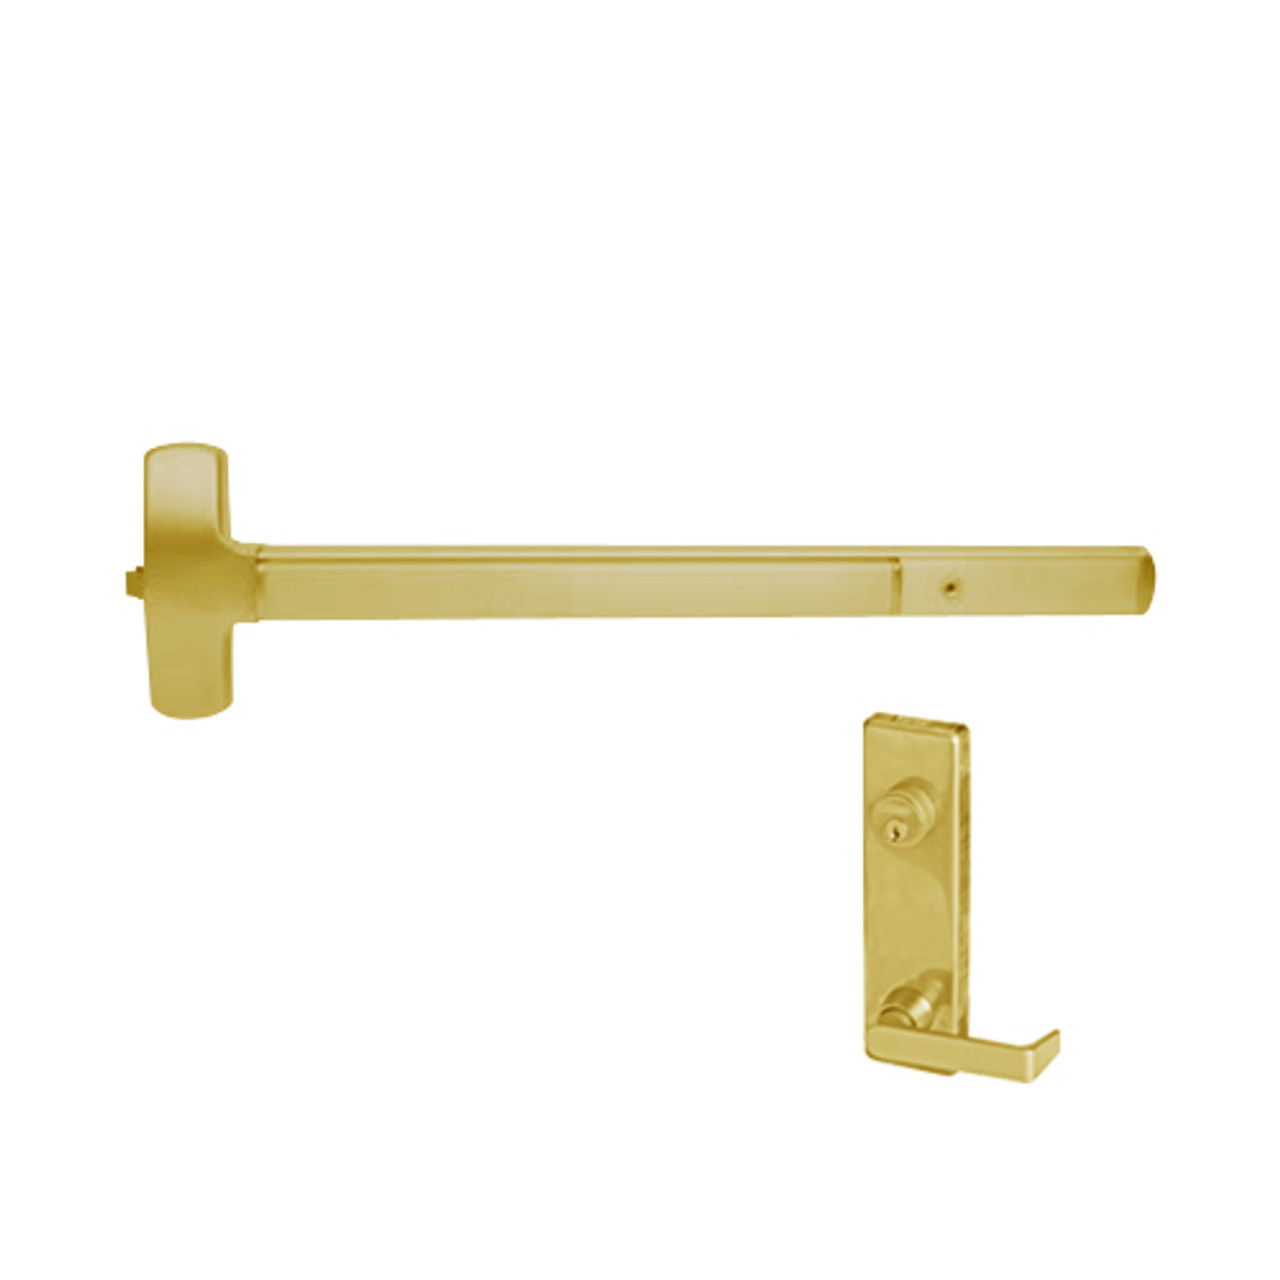 25-R-L-DANE-US3-3-LHR Falcon Exit Device in Polished Brass